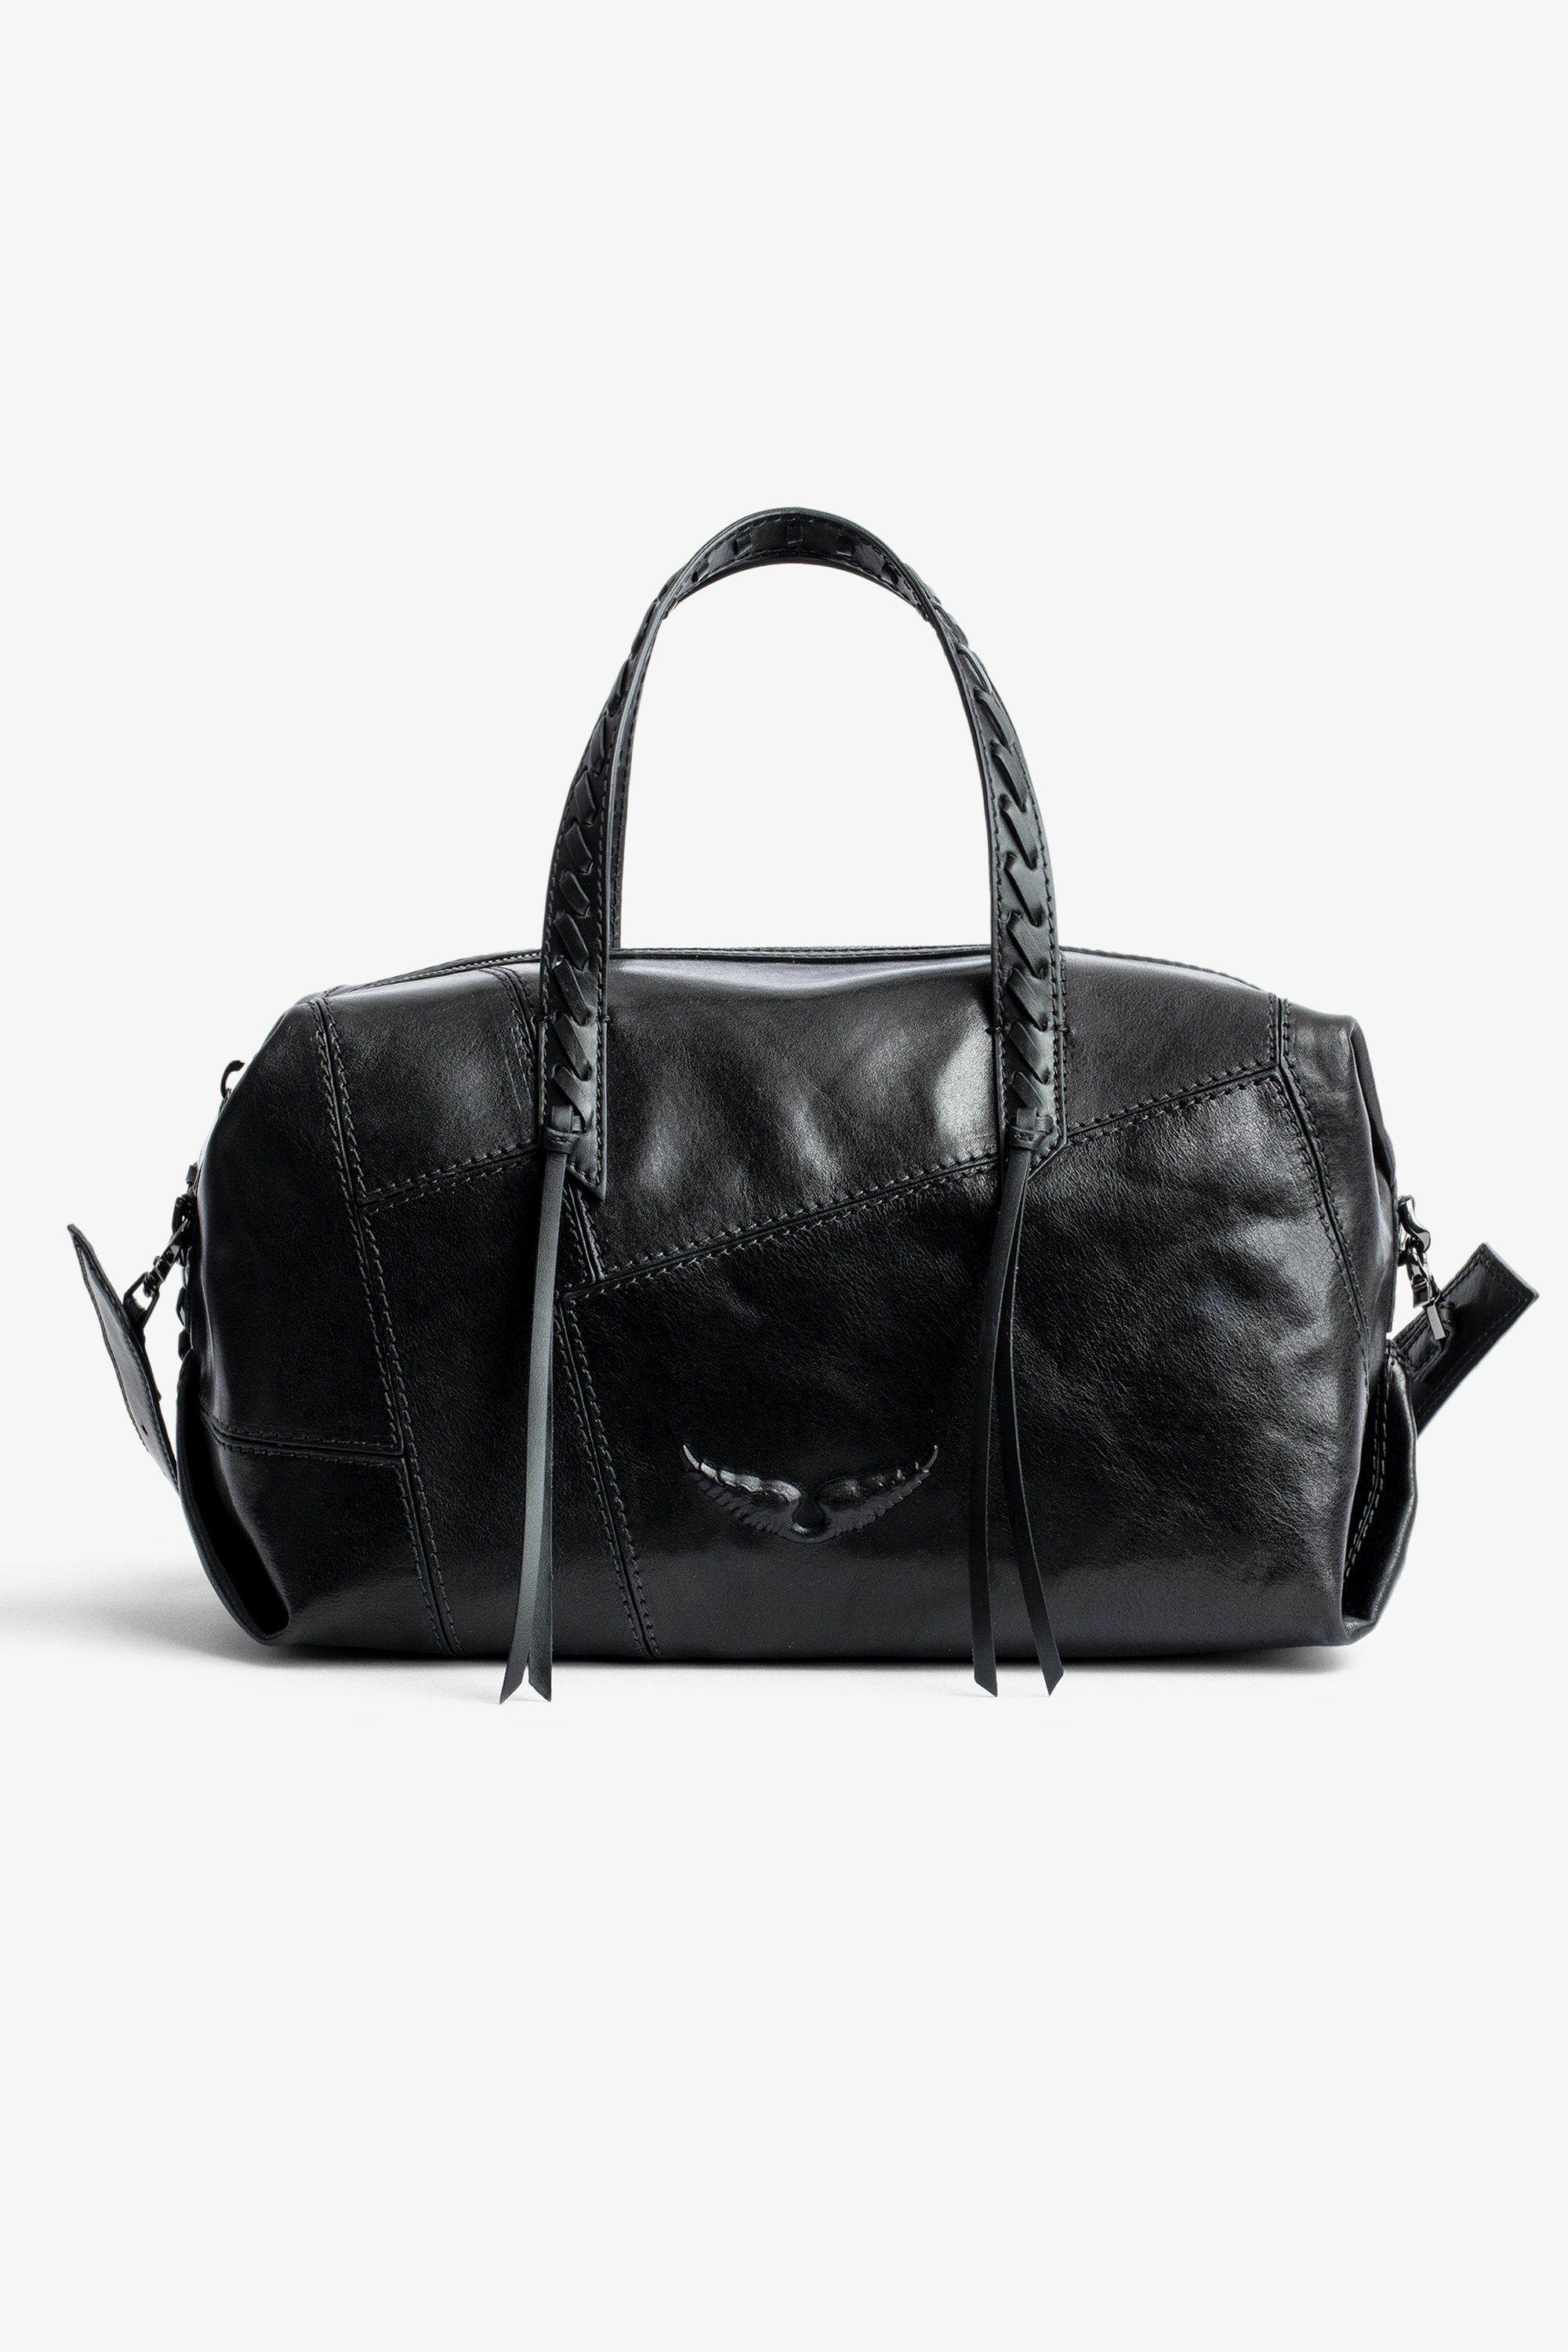 Le Cecilia Duffle Patchwork Bag Women’s black leather zipped bag with handles and shoulder strap